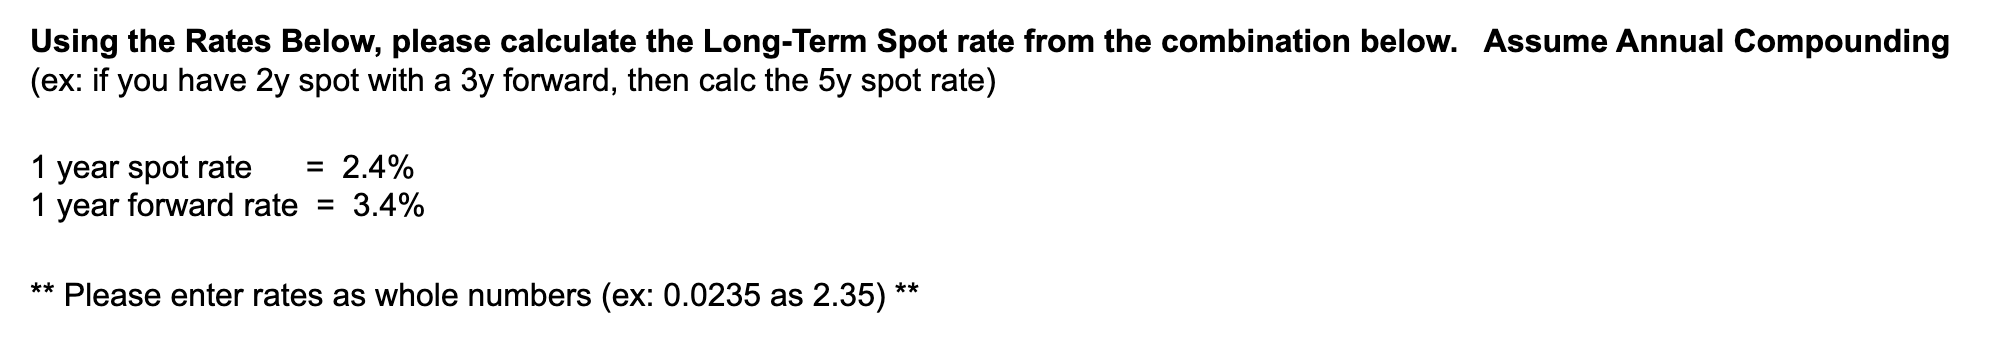 Using the Rates Below, please calculate the Long-Term Spot rate from the combination below. Assume Annual